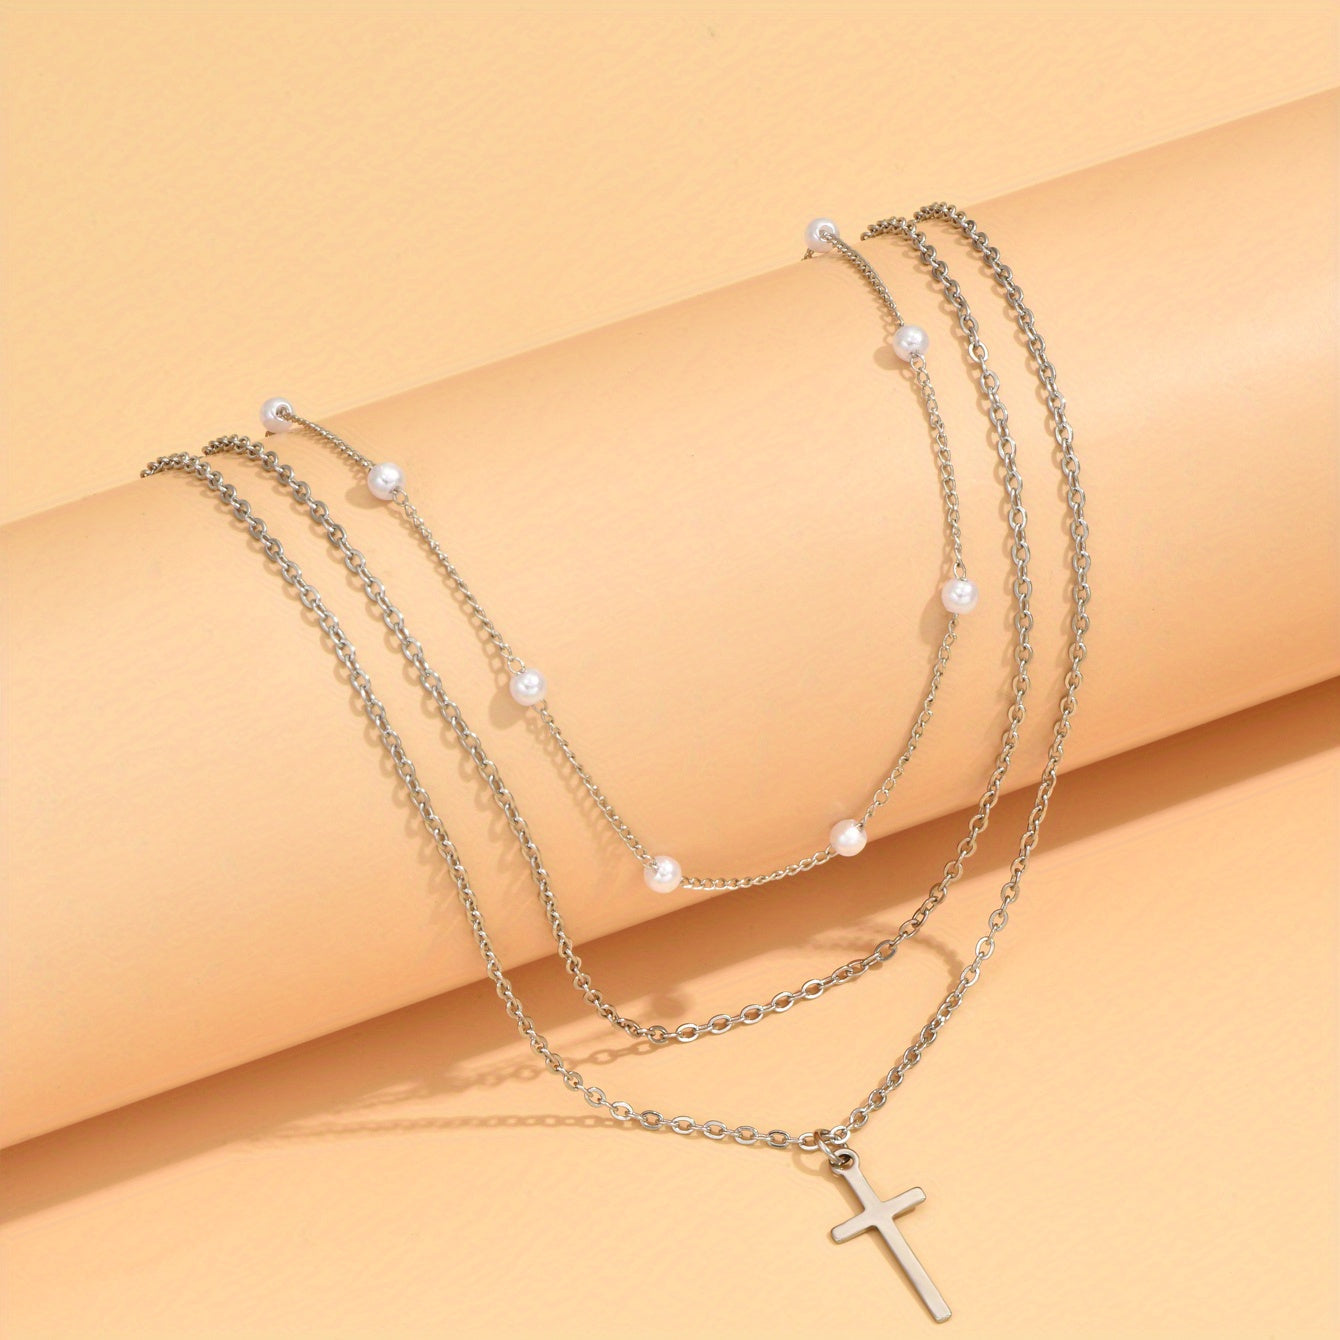 Elegant Layered Necklace with Retro Imitation Pearl Cross Pendant - Perfect Gift for Women